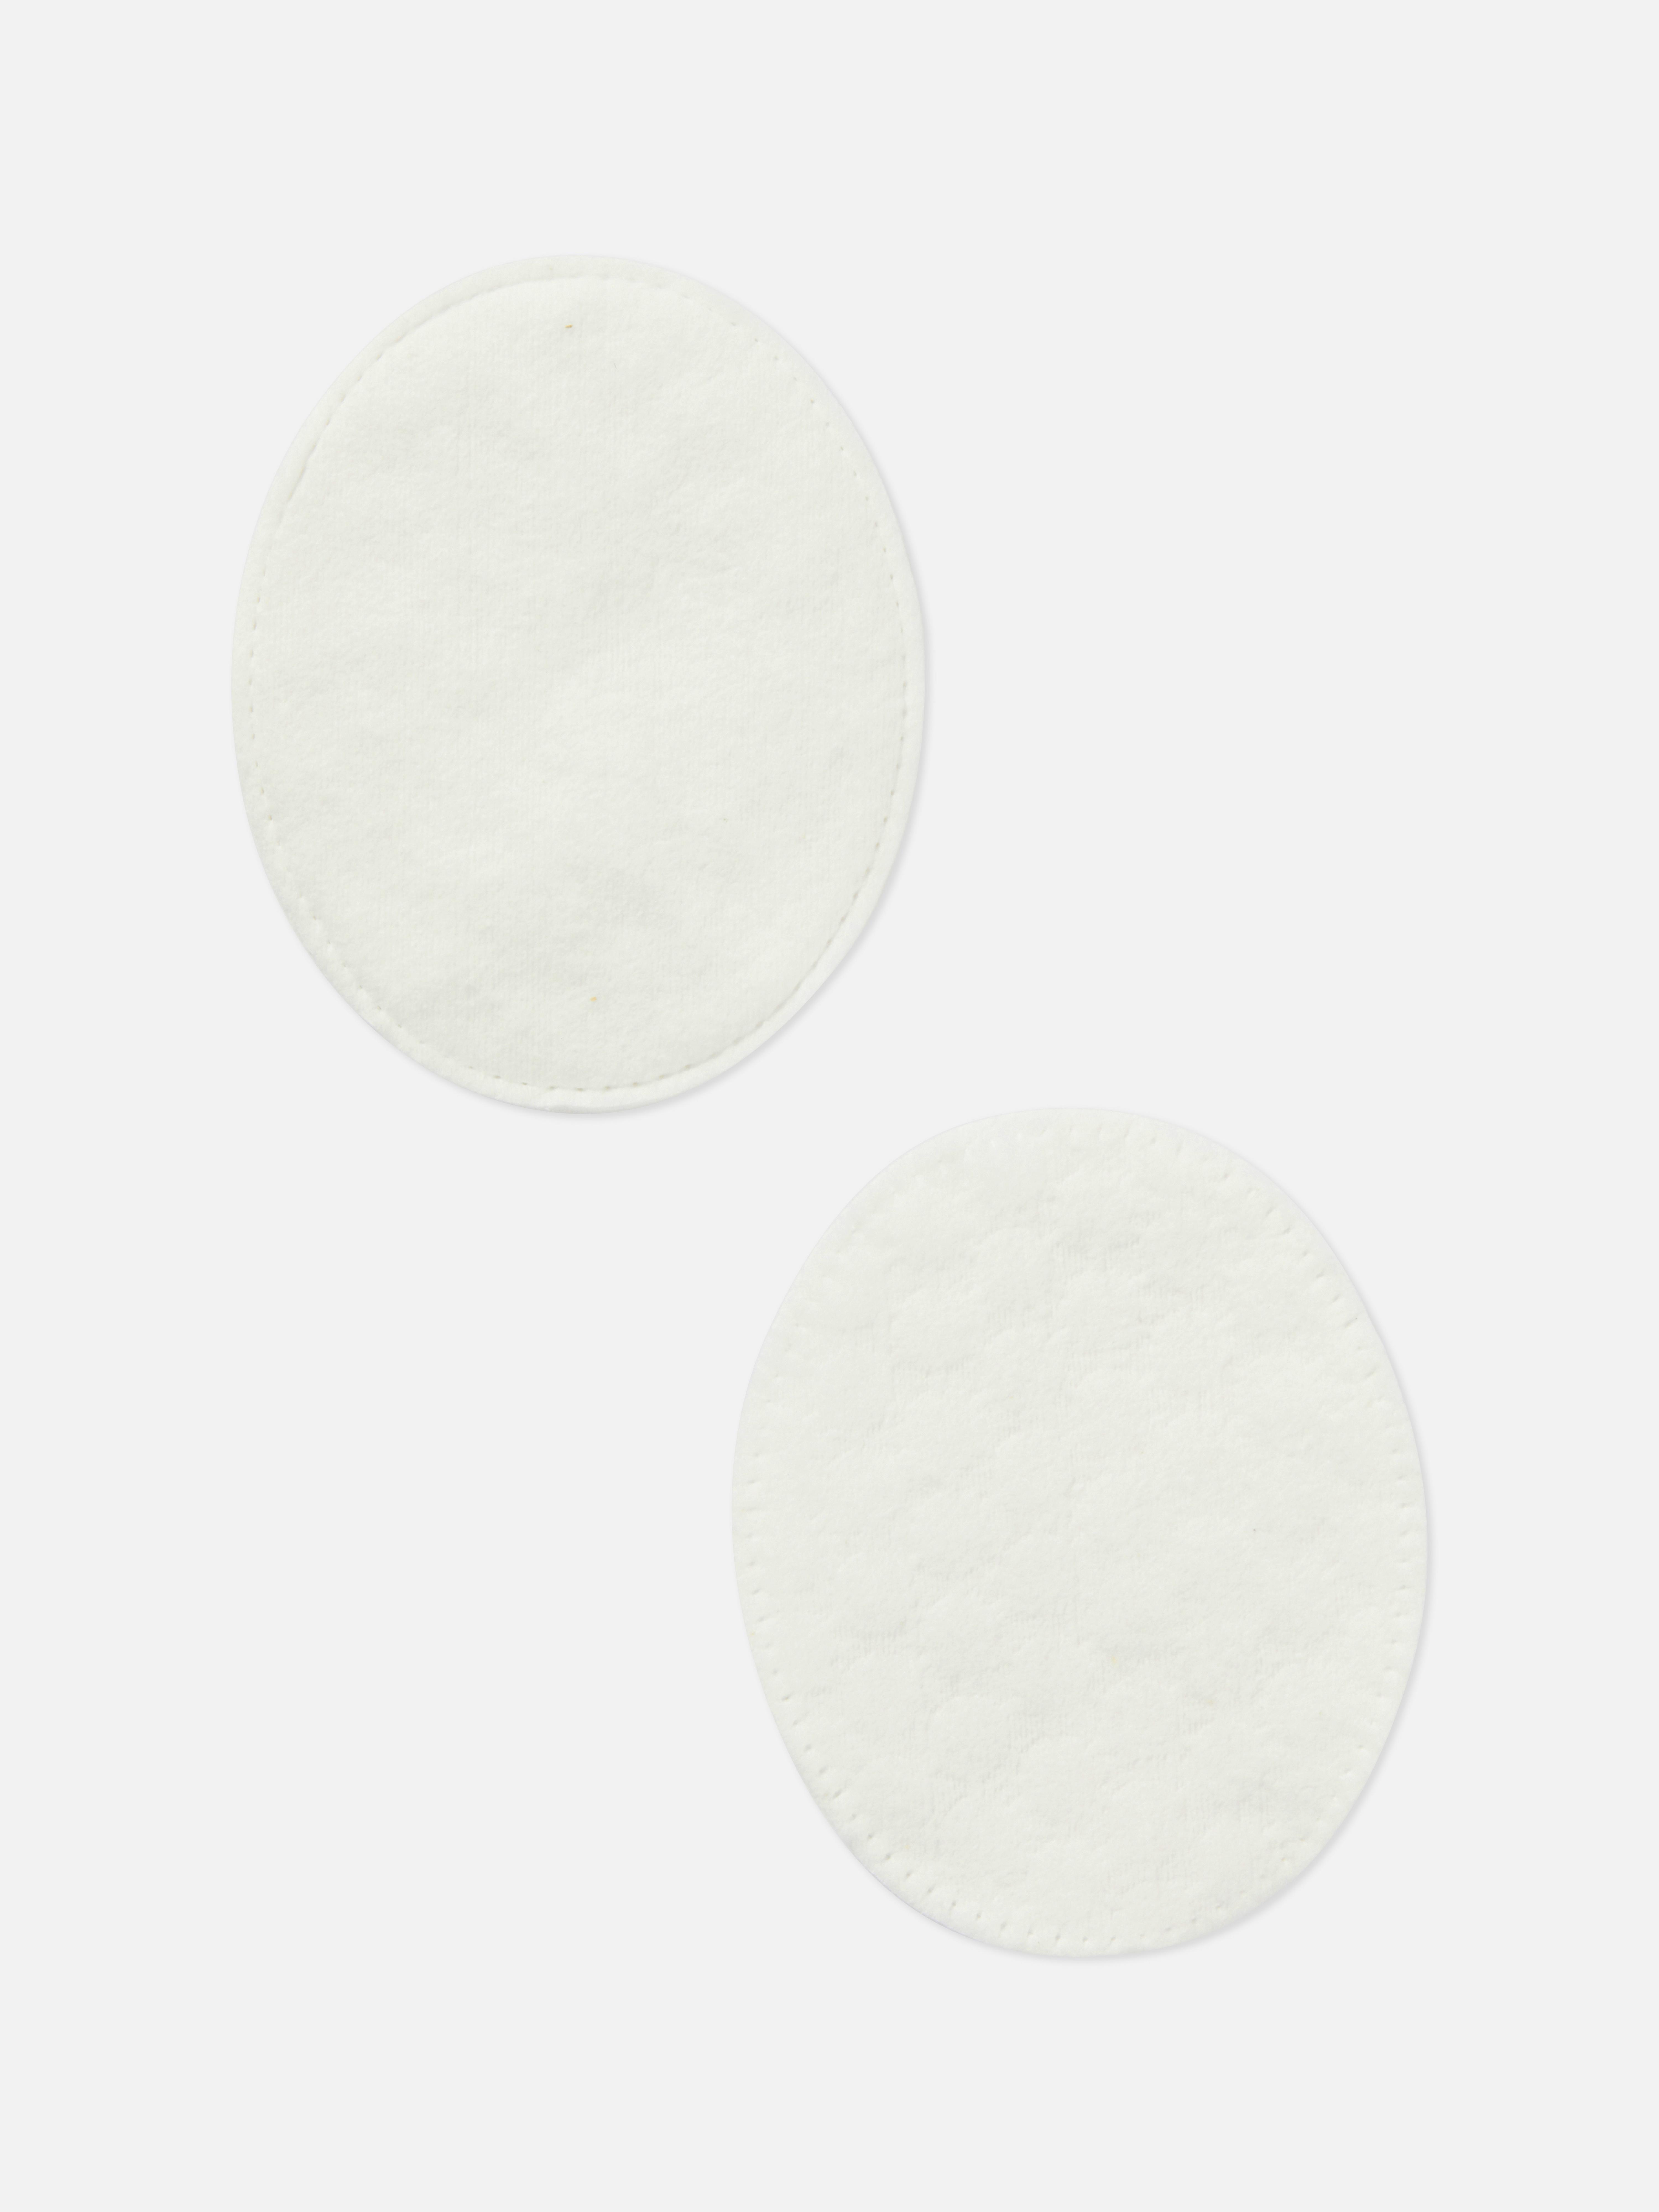 PS 50-Pack Oval Cotton Cosmetic Pads